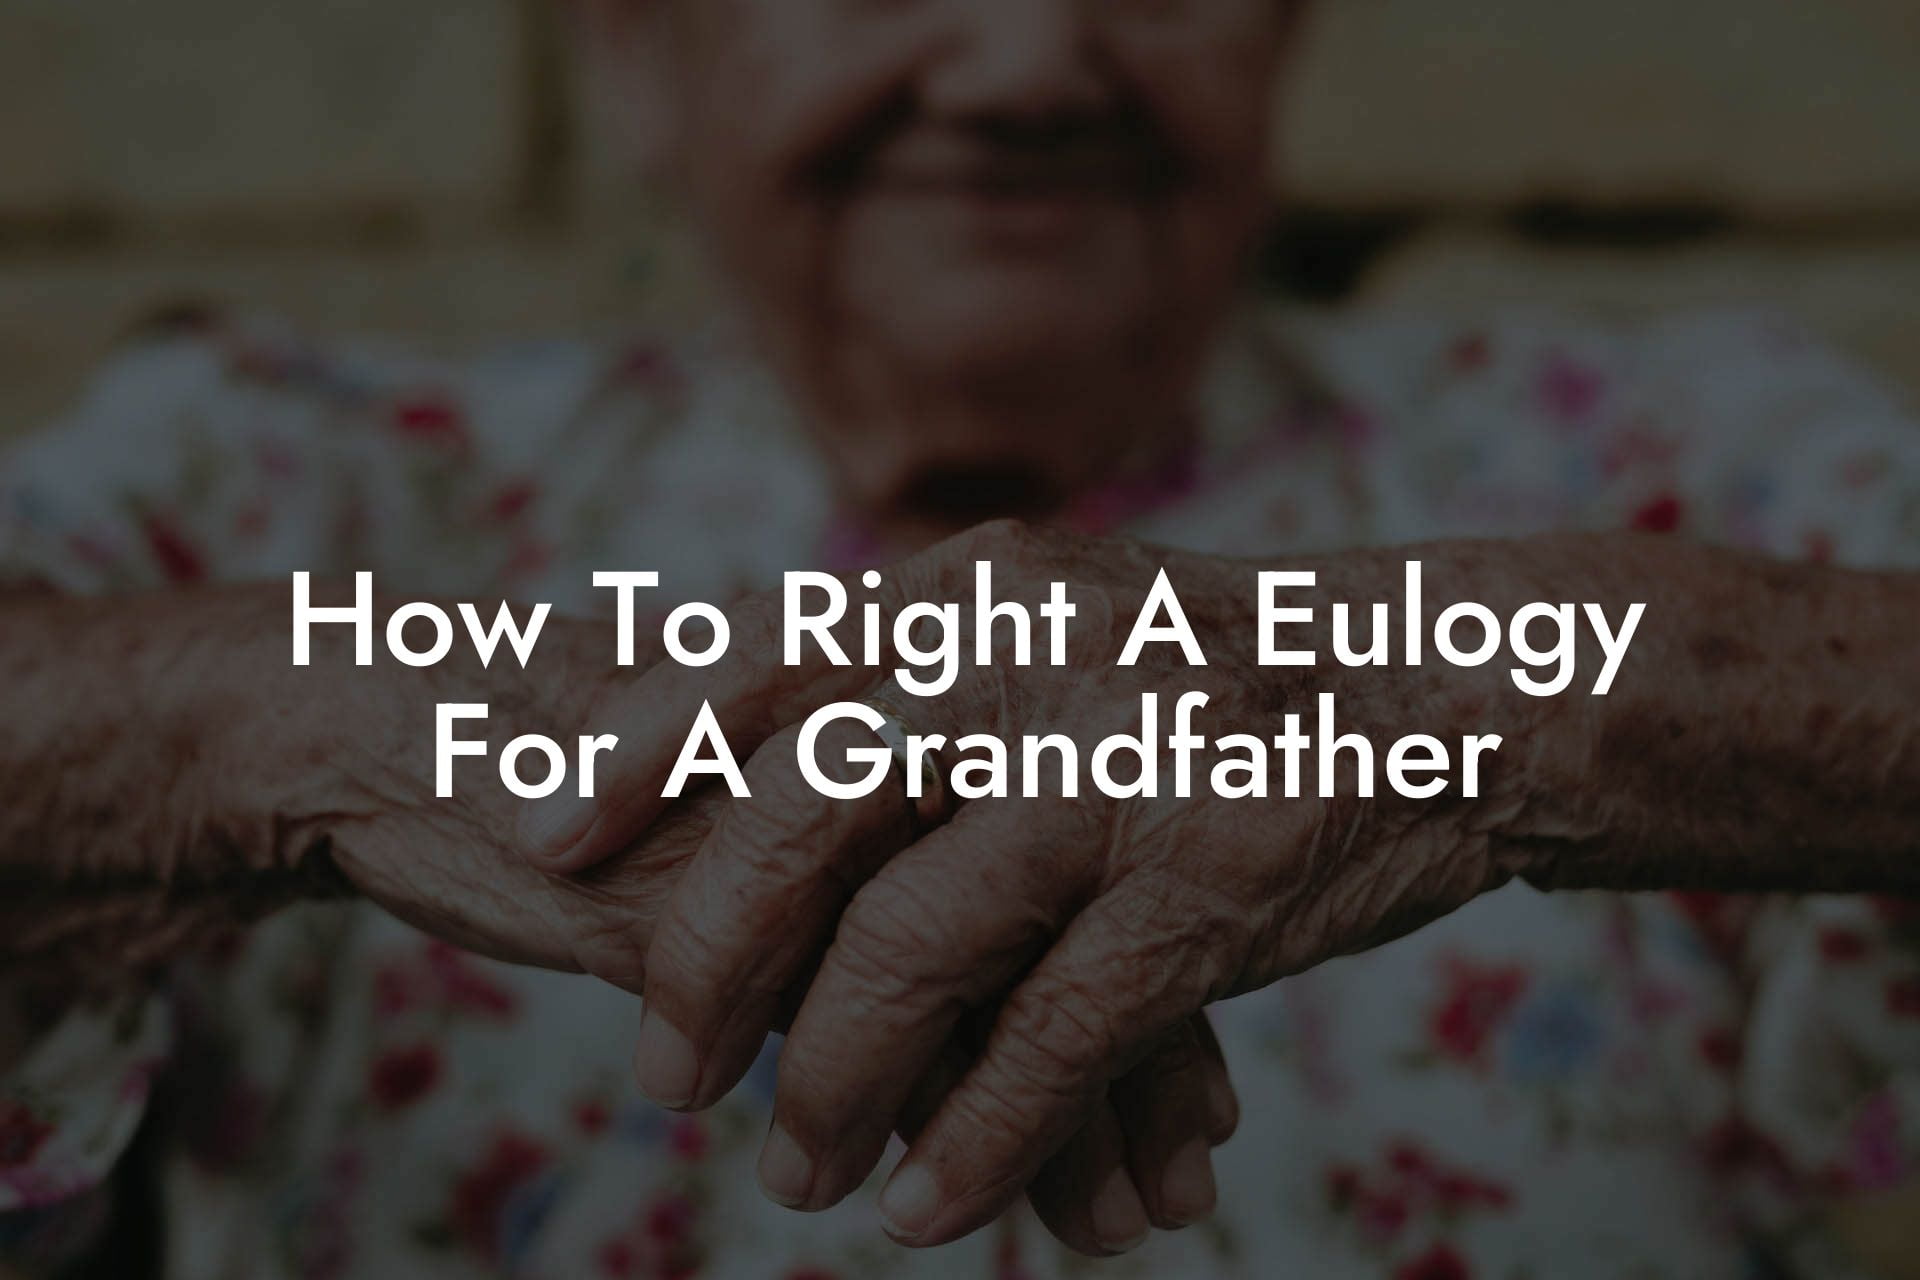 How To Right A Eulogy For A Grandfather